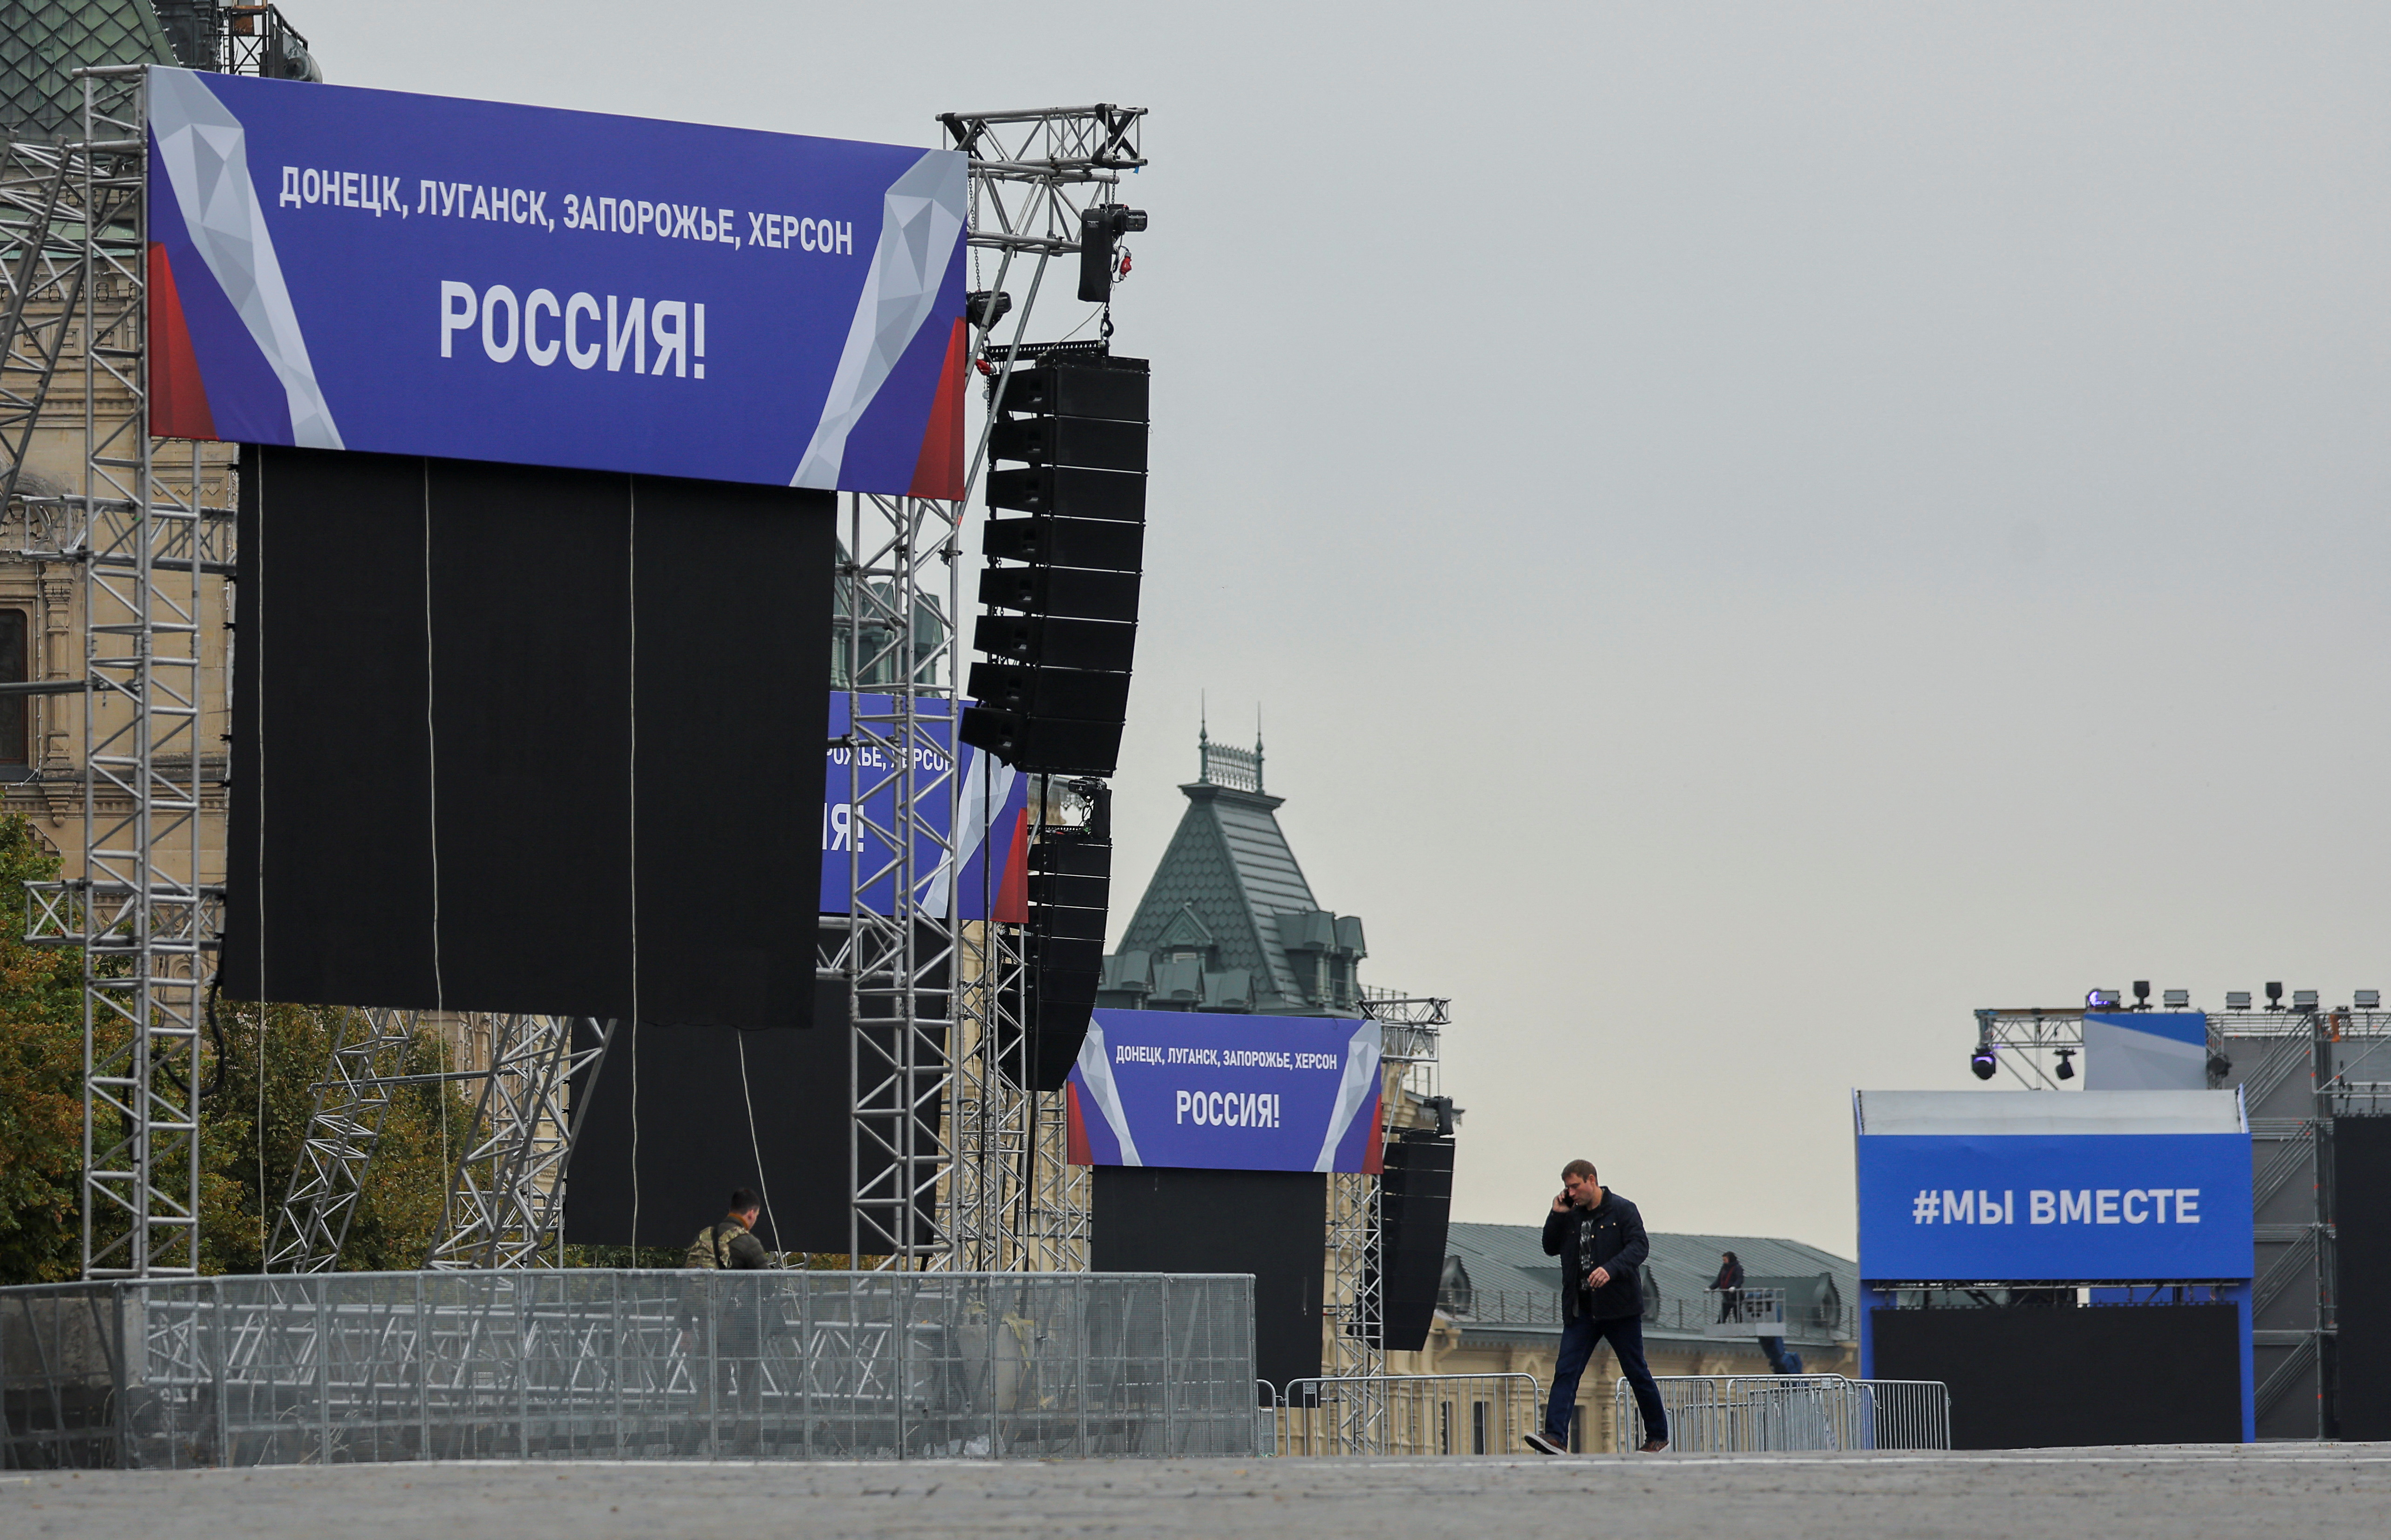 A view shows banners and constructions in Red Square in Moscow